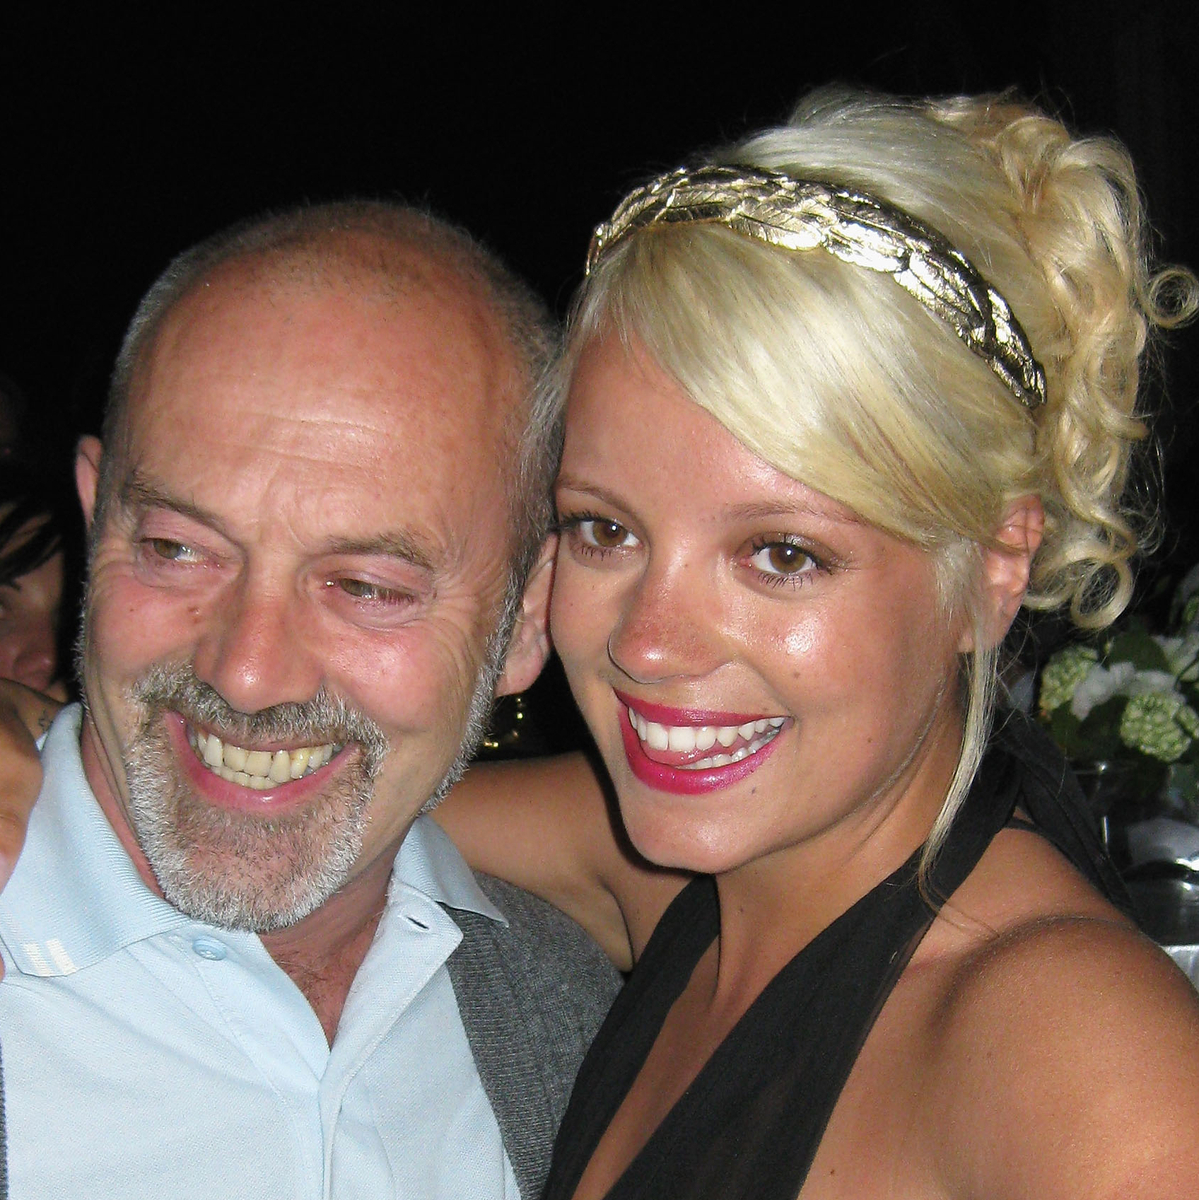 Lily Allen Shares Her Dad Called the Cops When She Lost Her Virginity